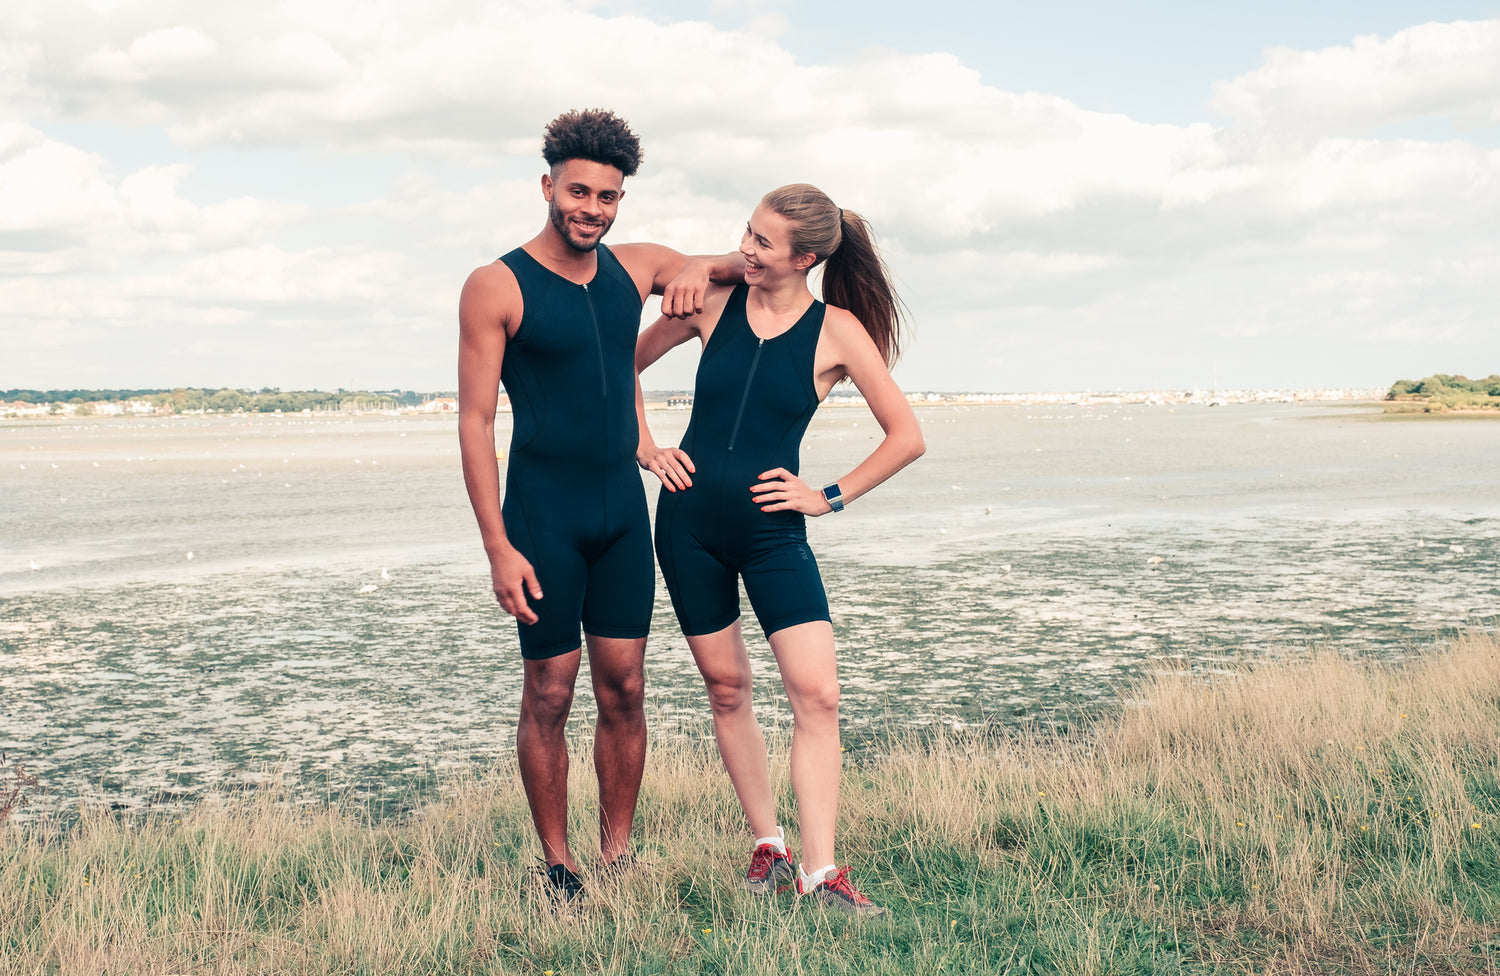 How to Pick a Tri Suit - Features and Benefits to Look Out For